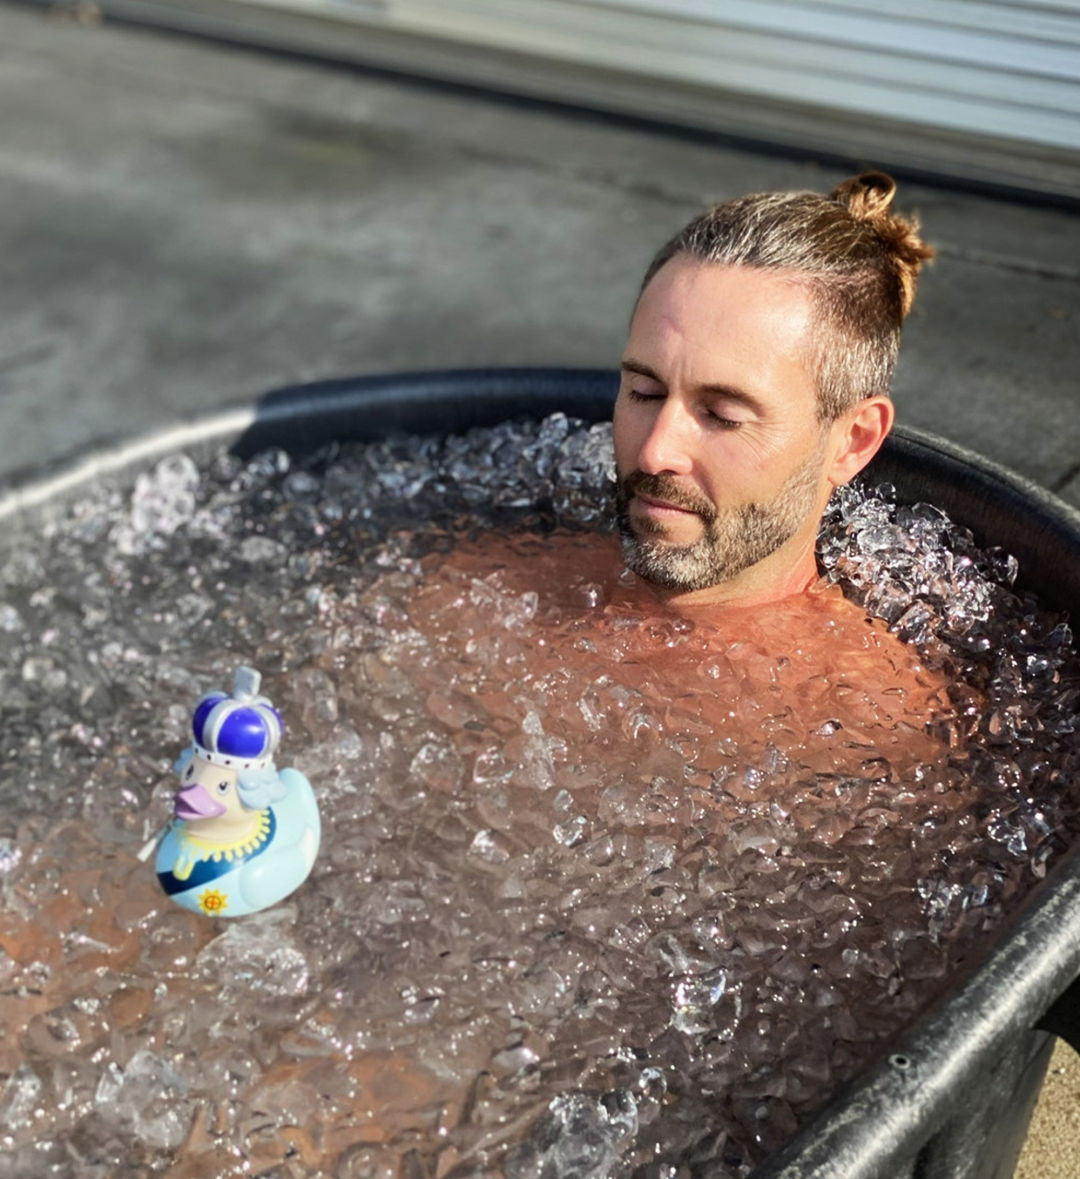 Wim Hof Method instructor Brock Cannon relaxes in an ice bath